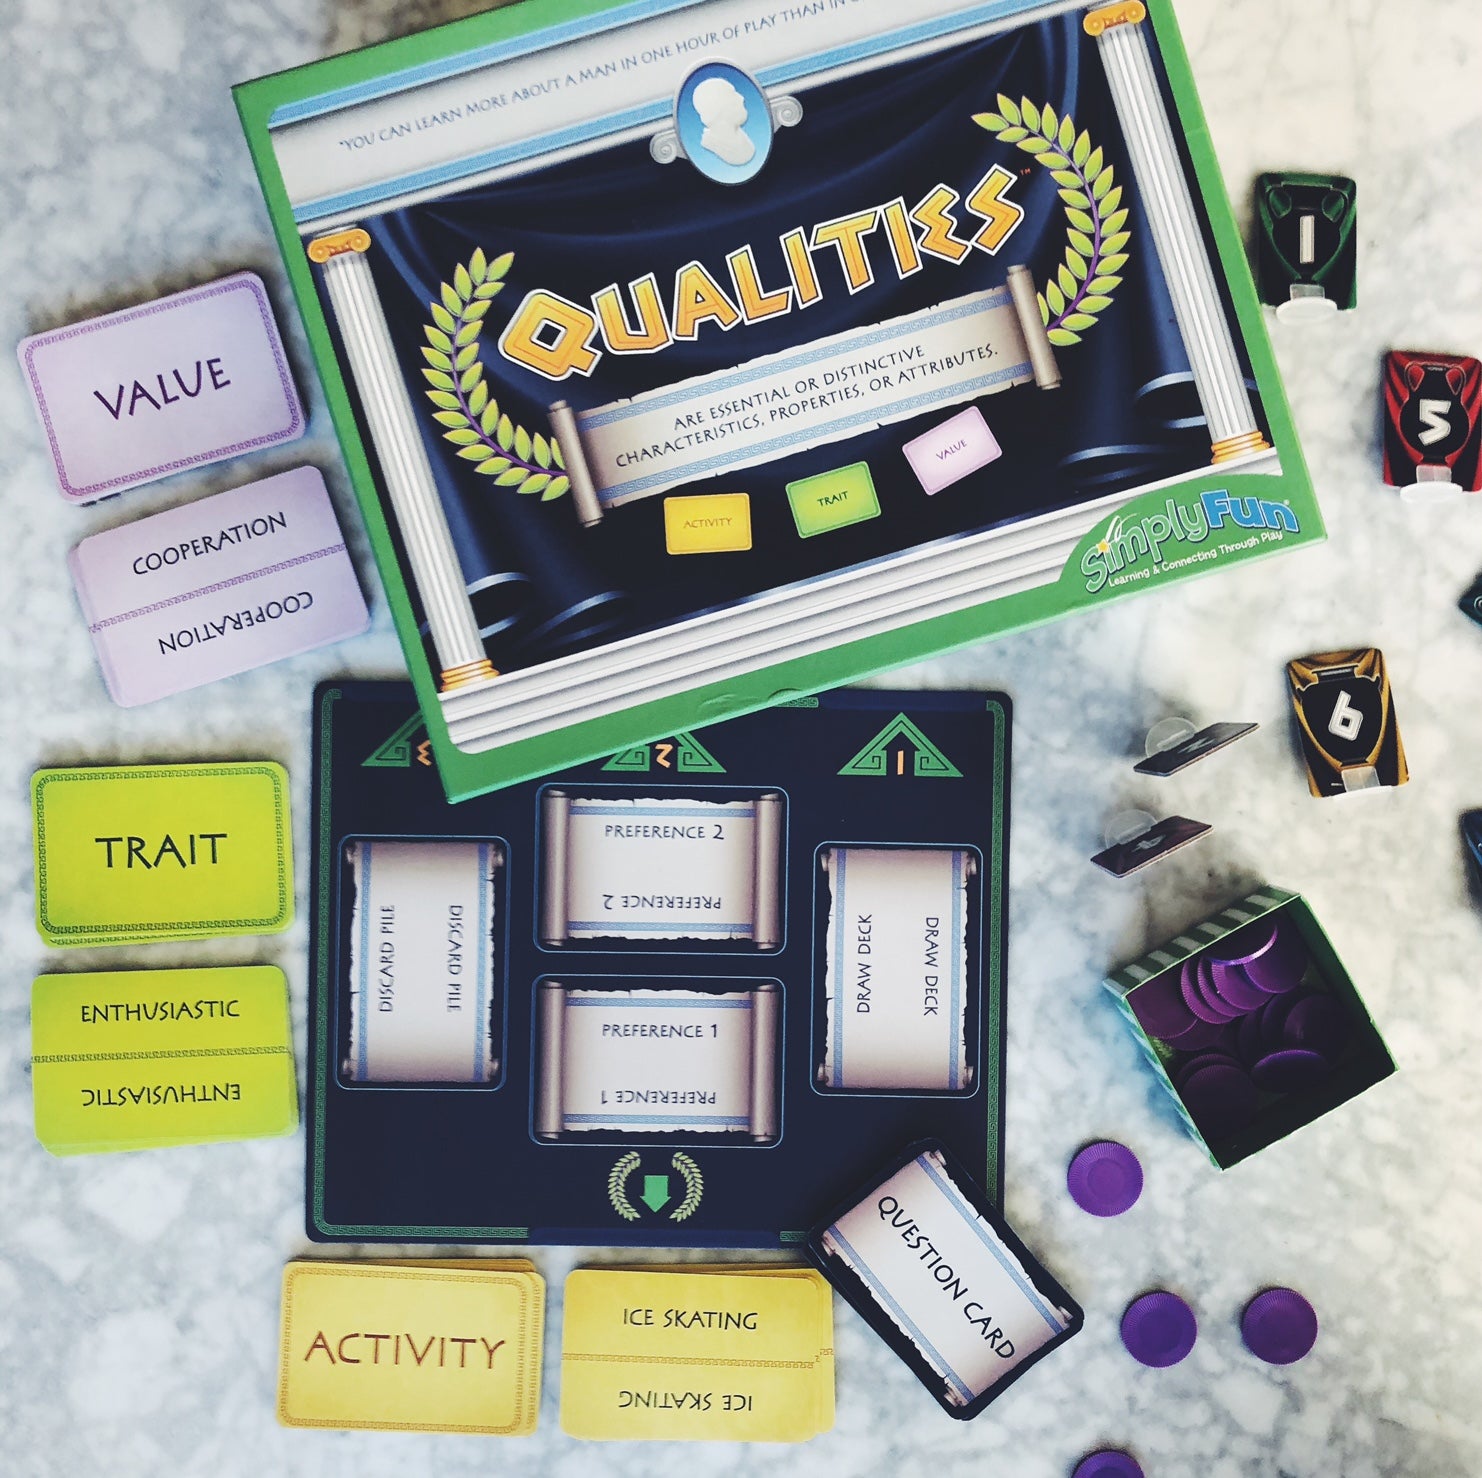 Qualities by SimplyFun is a social relationship game focusing on probability for ages 12 and up.